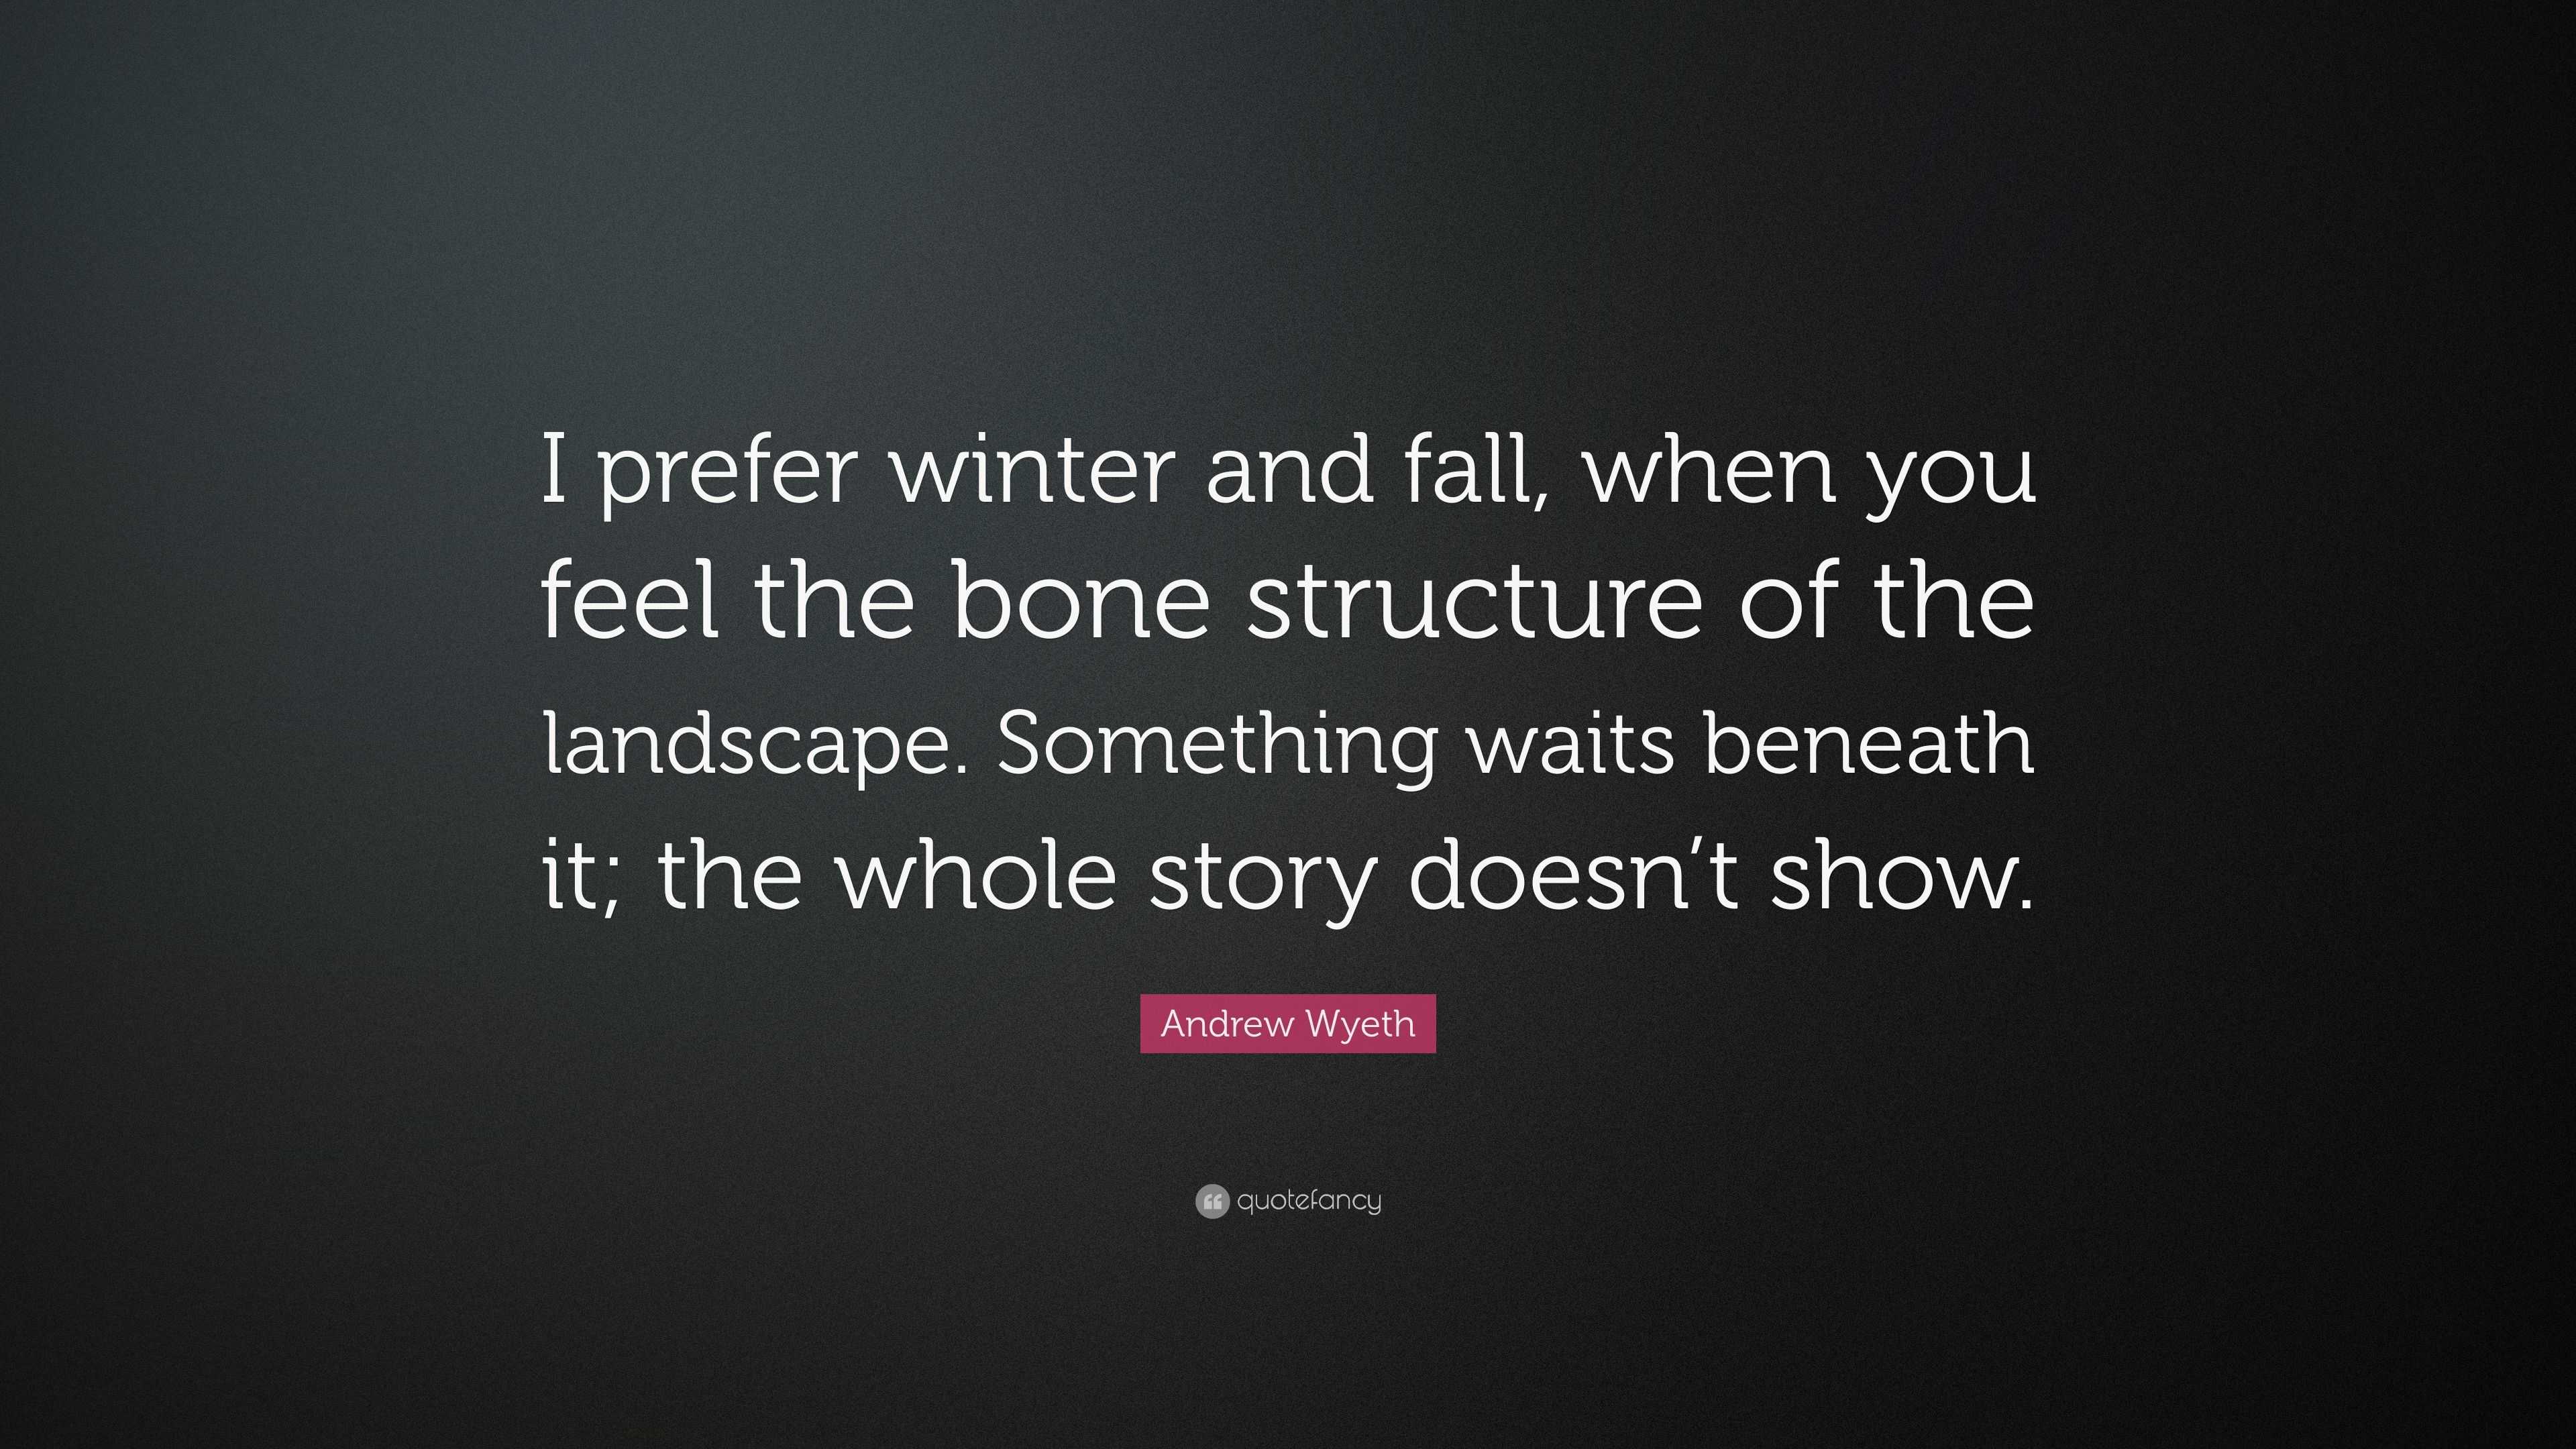 Andrew Wyeth's quote with image of fall leaves